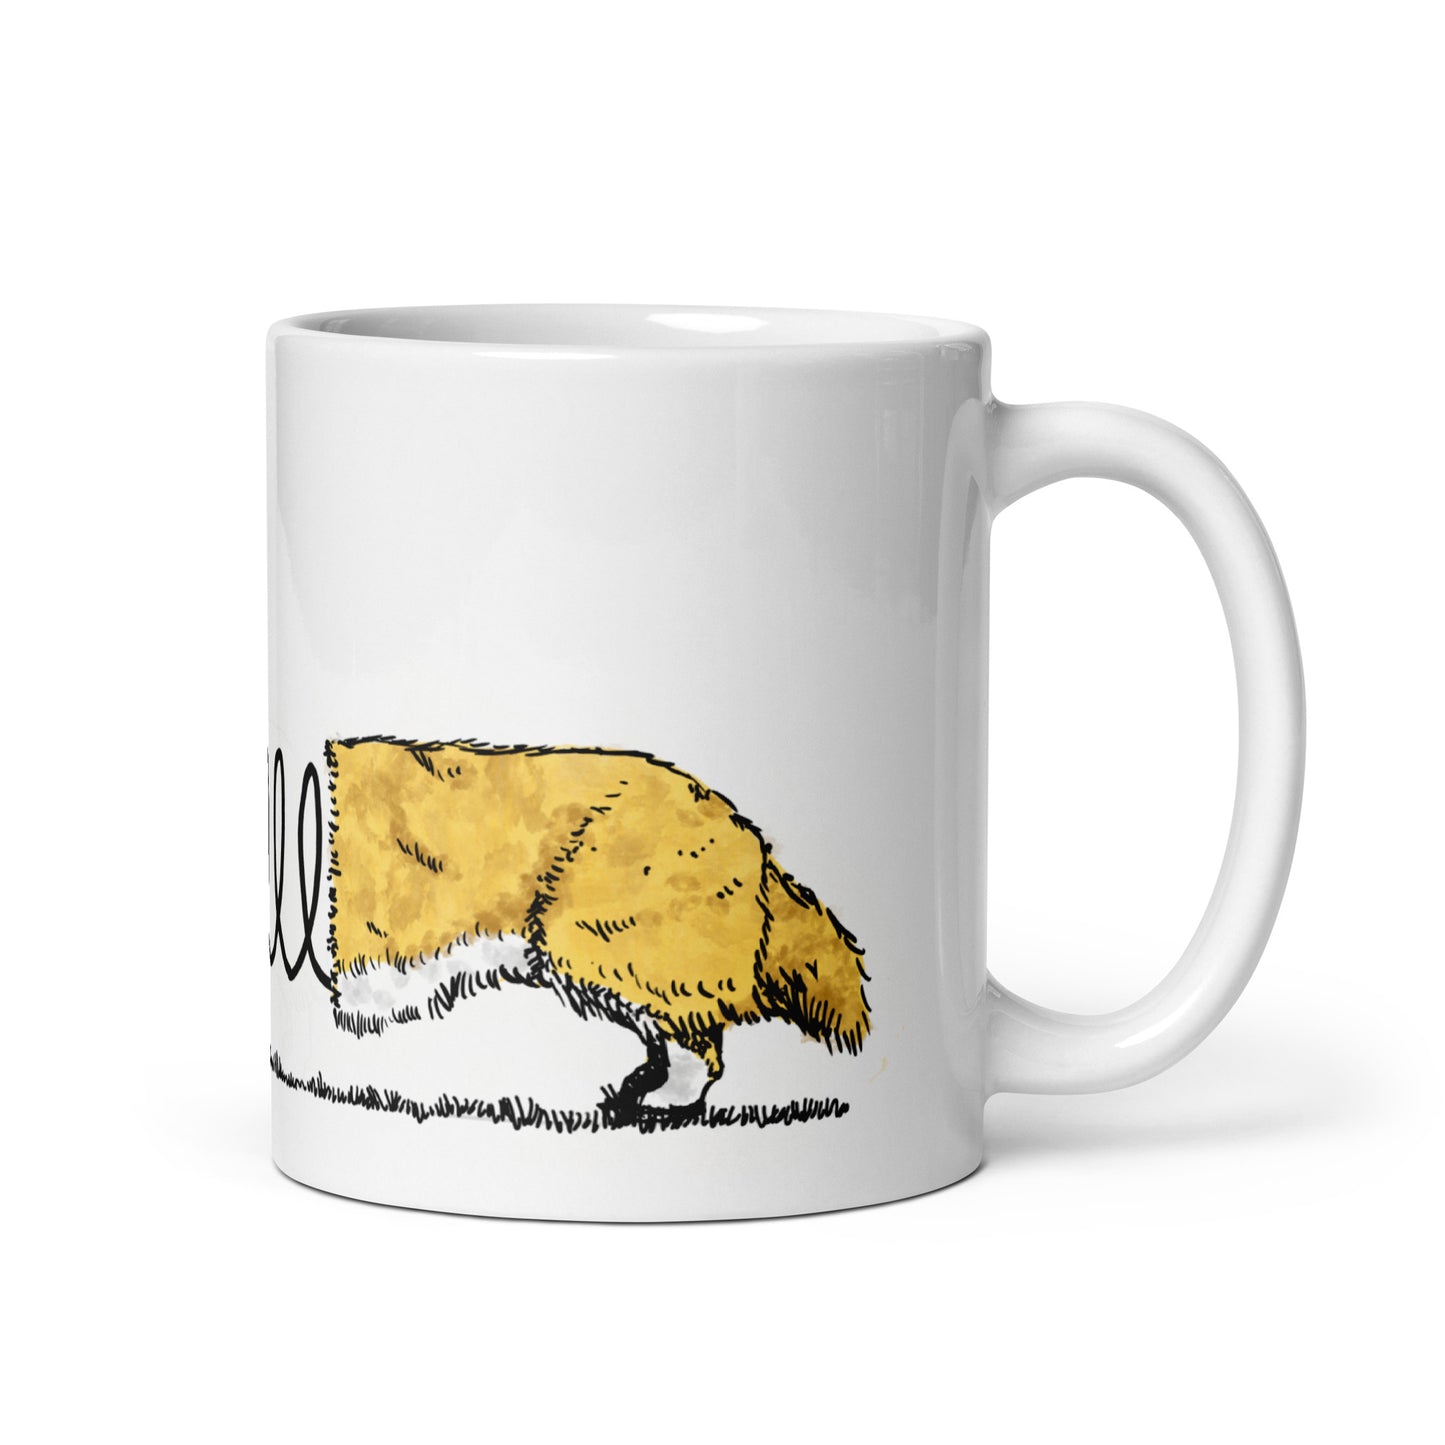 BellavanceInk: Coffee Mug With A Corgi Attached Together By A Coil